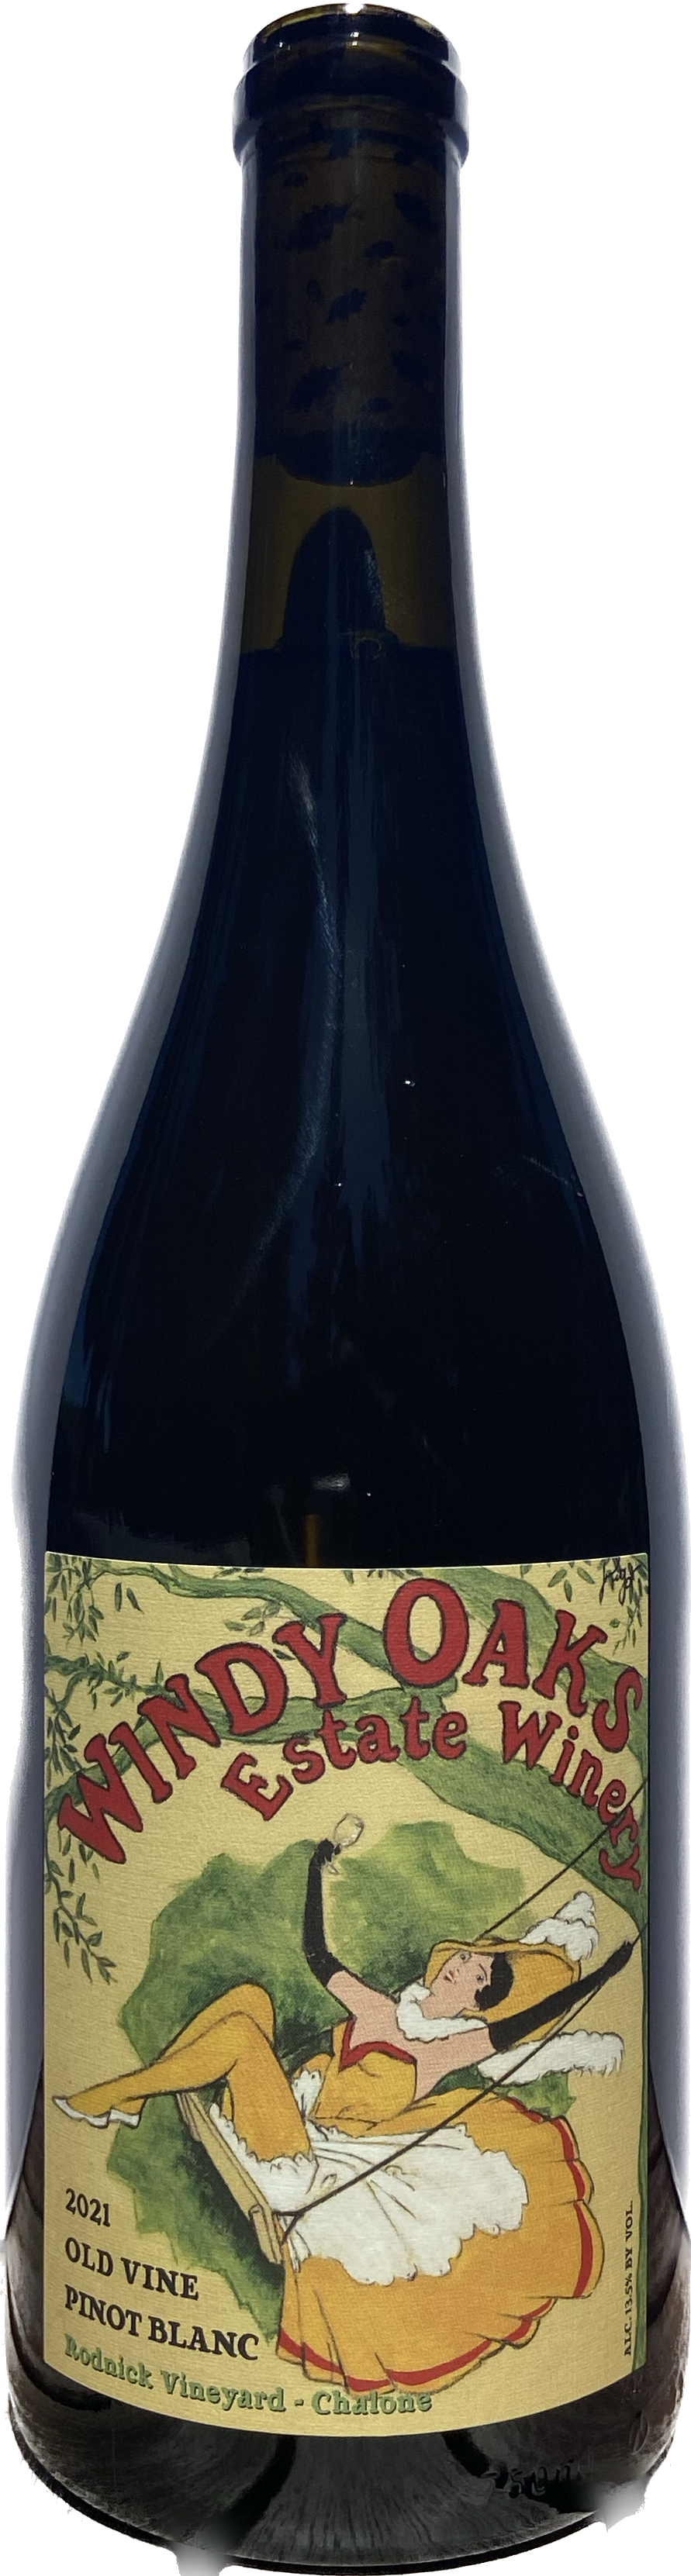 Product Image for 2021 'Old Vine' Pinot Blanc, Chalone